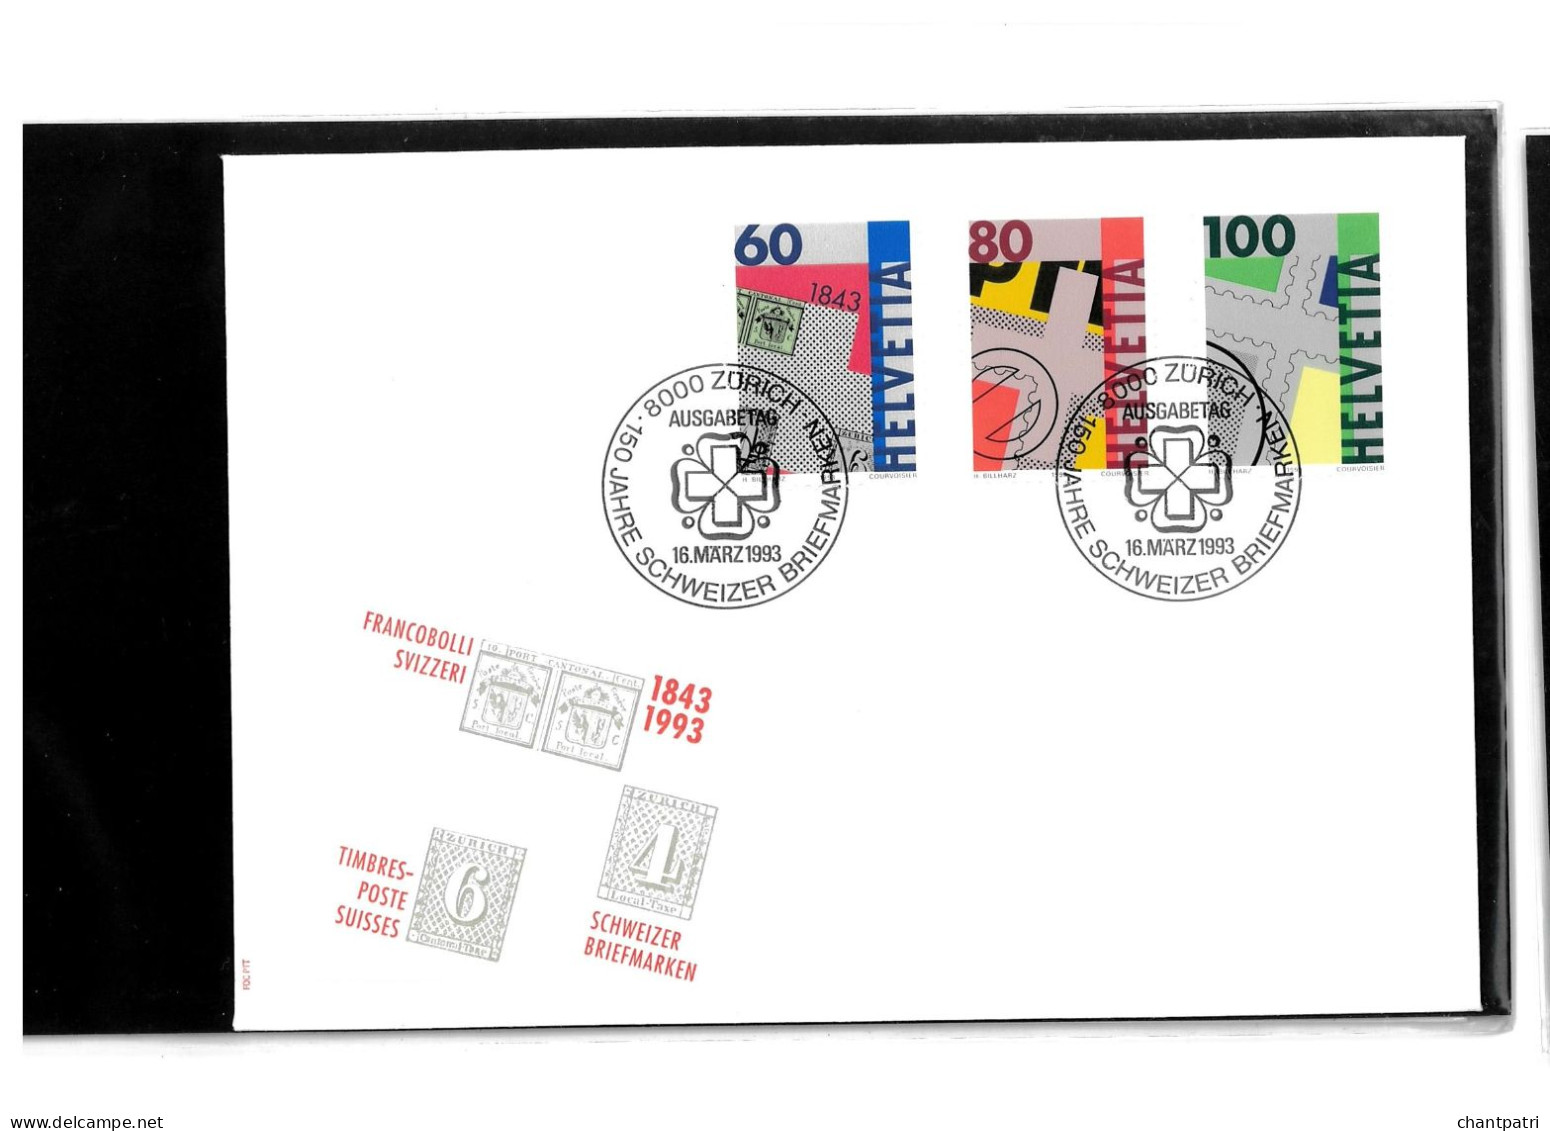 8000 Zurich - Timbres Poste Suisses - 16 03 1993 - Beli FDC 053 - Covers & Documents